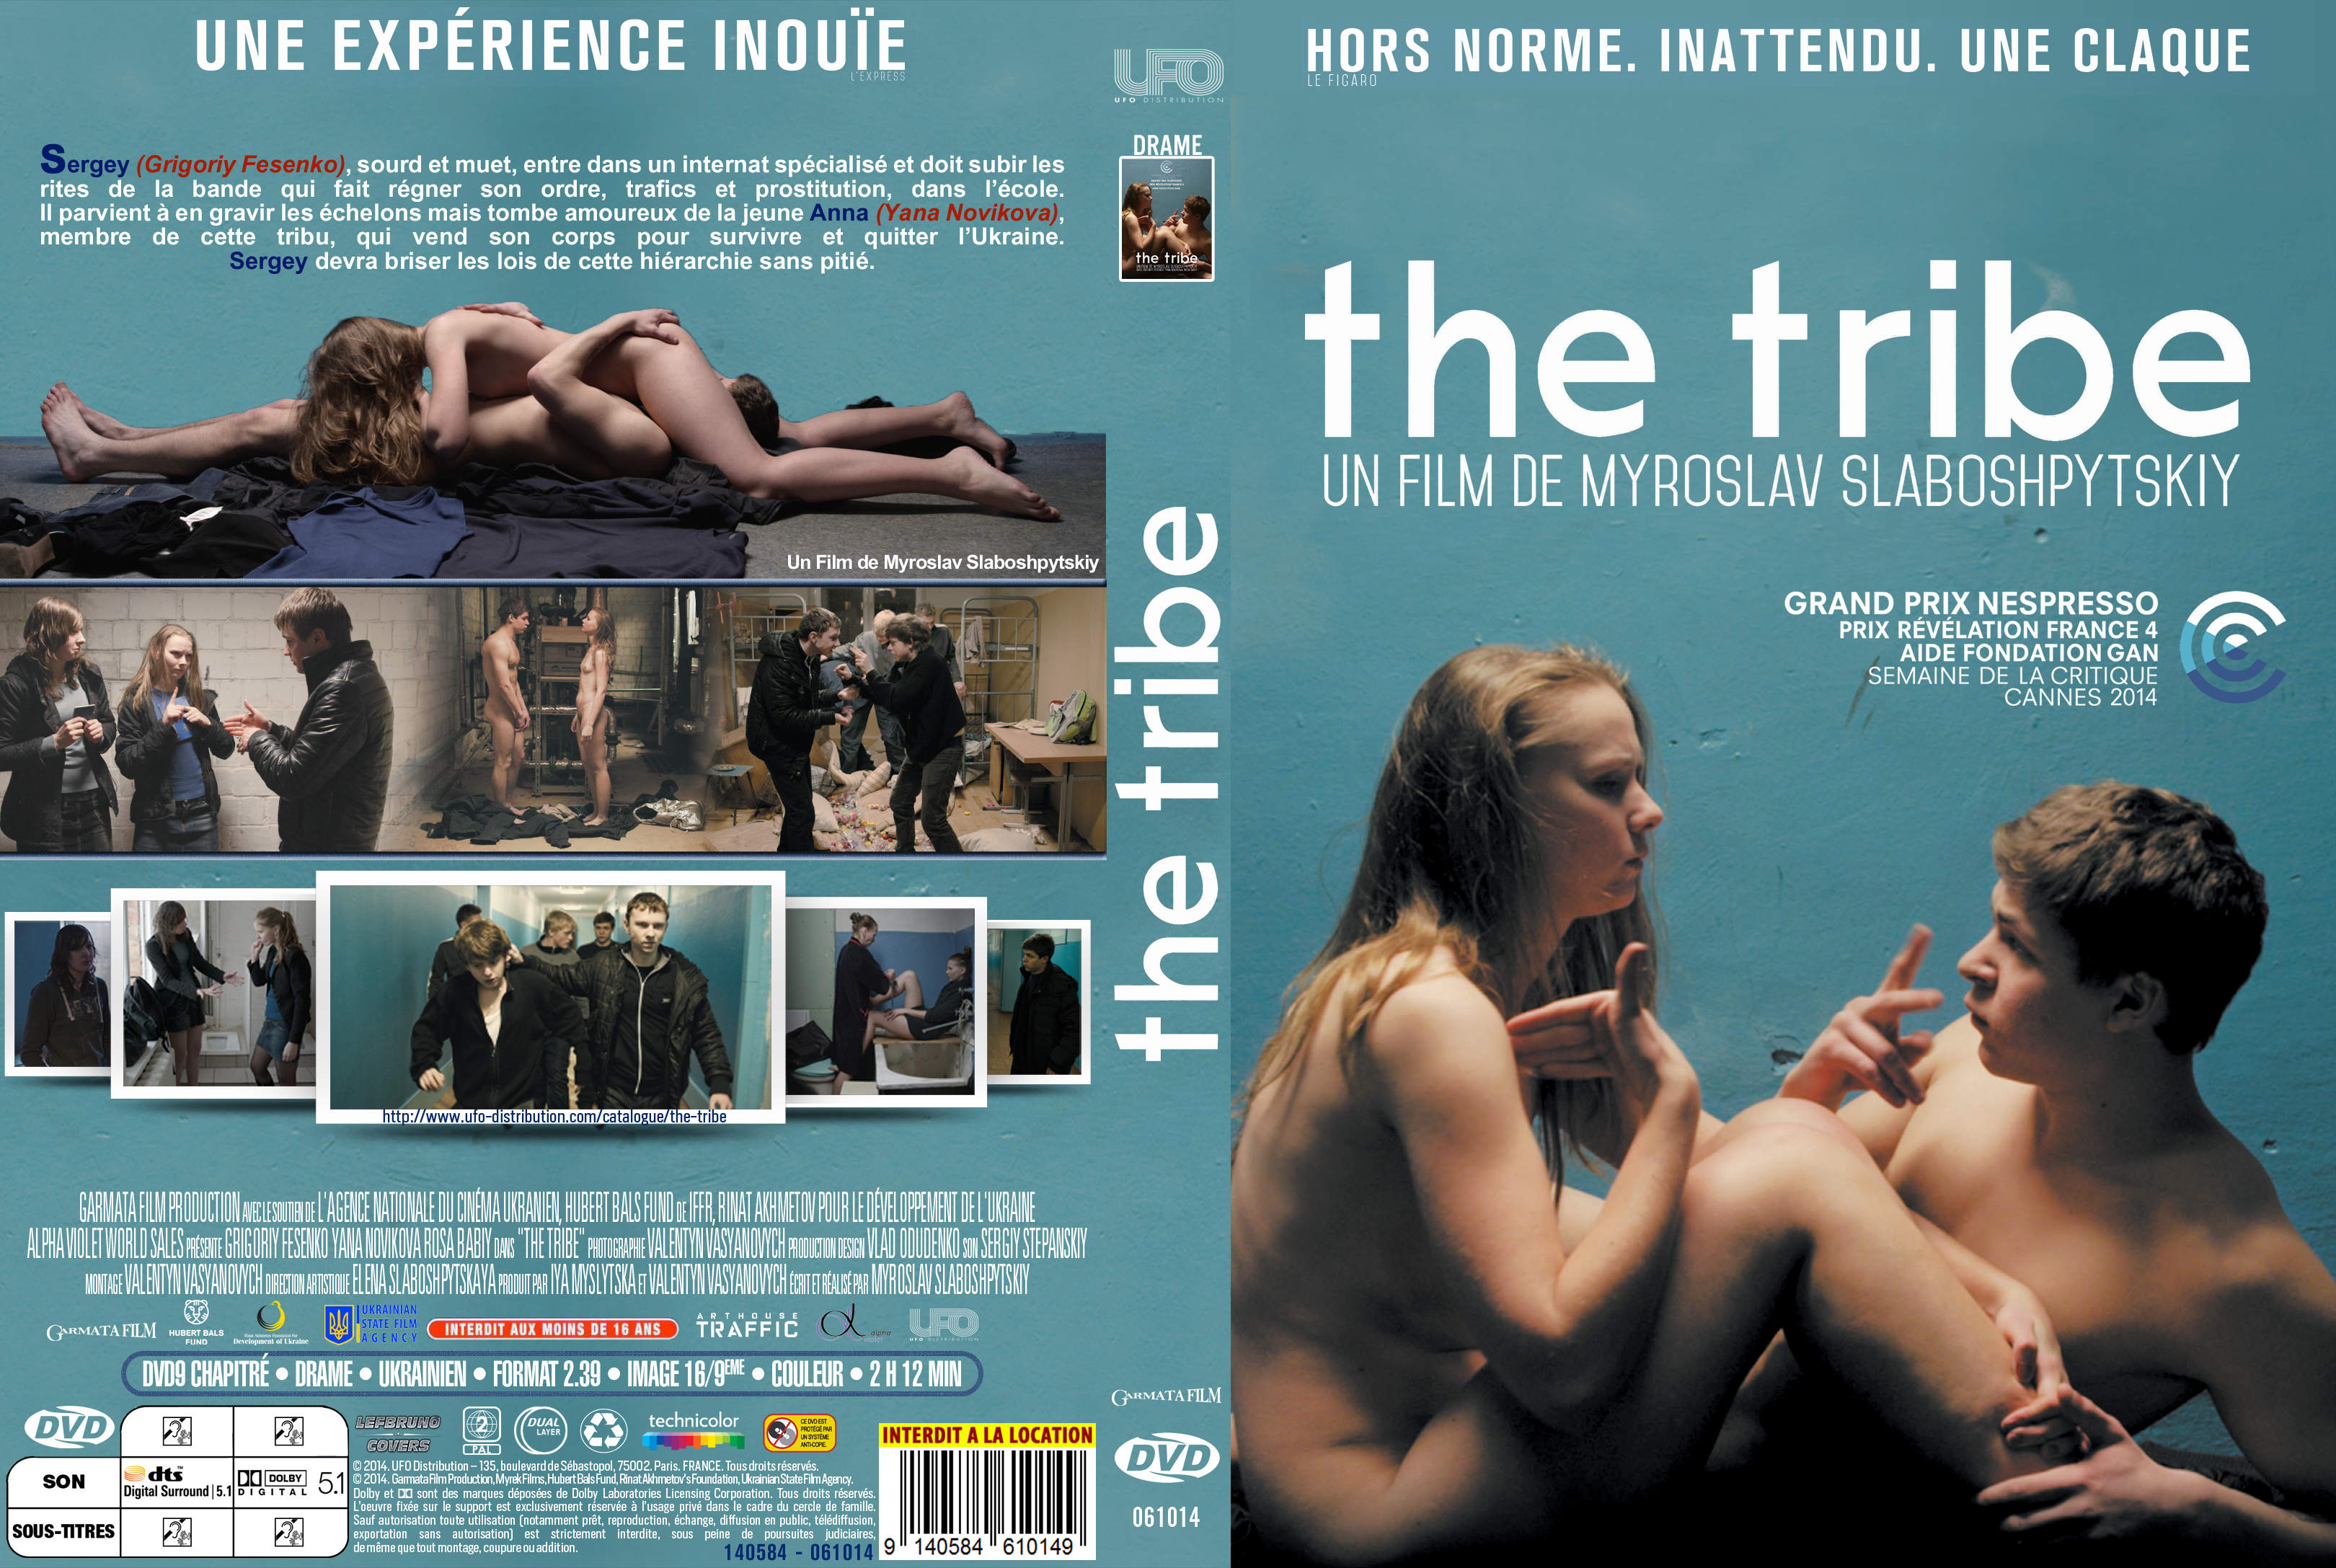 Jaquette DVD The Tribe (2014) custom